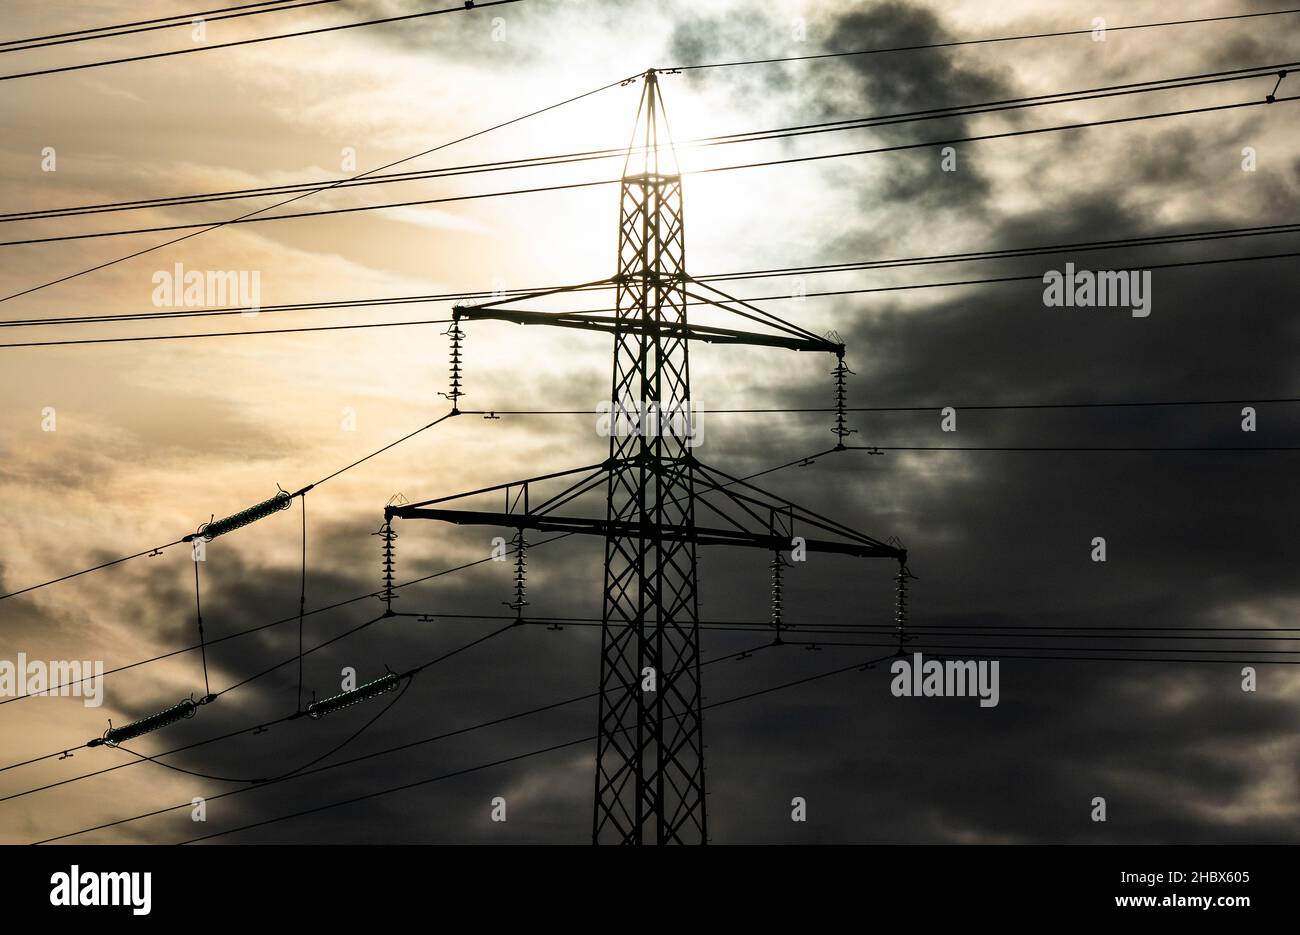 Overhead power lines. Electric power transmission. Electrical energy Photo: Johan Nilsson / TT / code 50090 Stock Photo